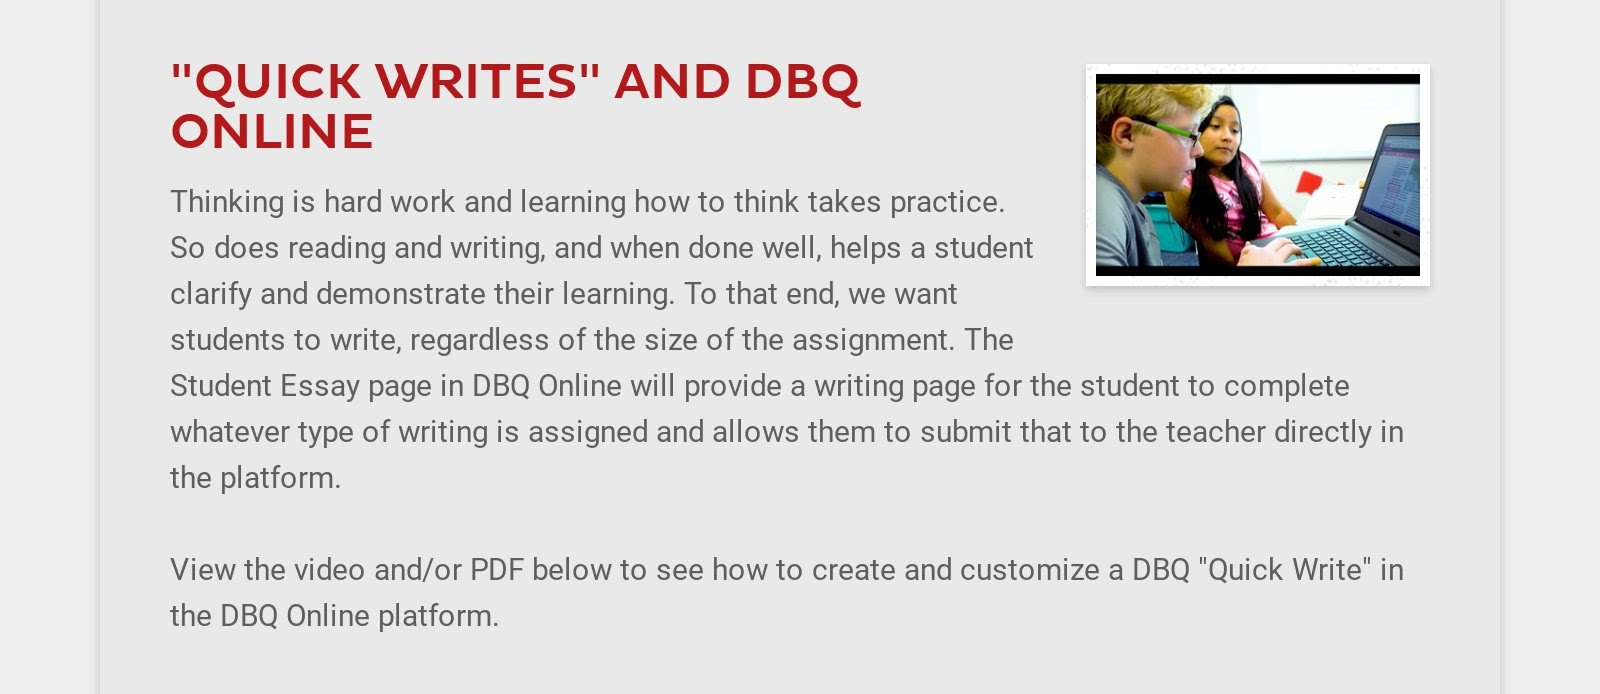 "QUICK WRITES" AND DBQ ONLINE    Thinking is hard work and learning how to think takes practice. So...